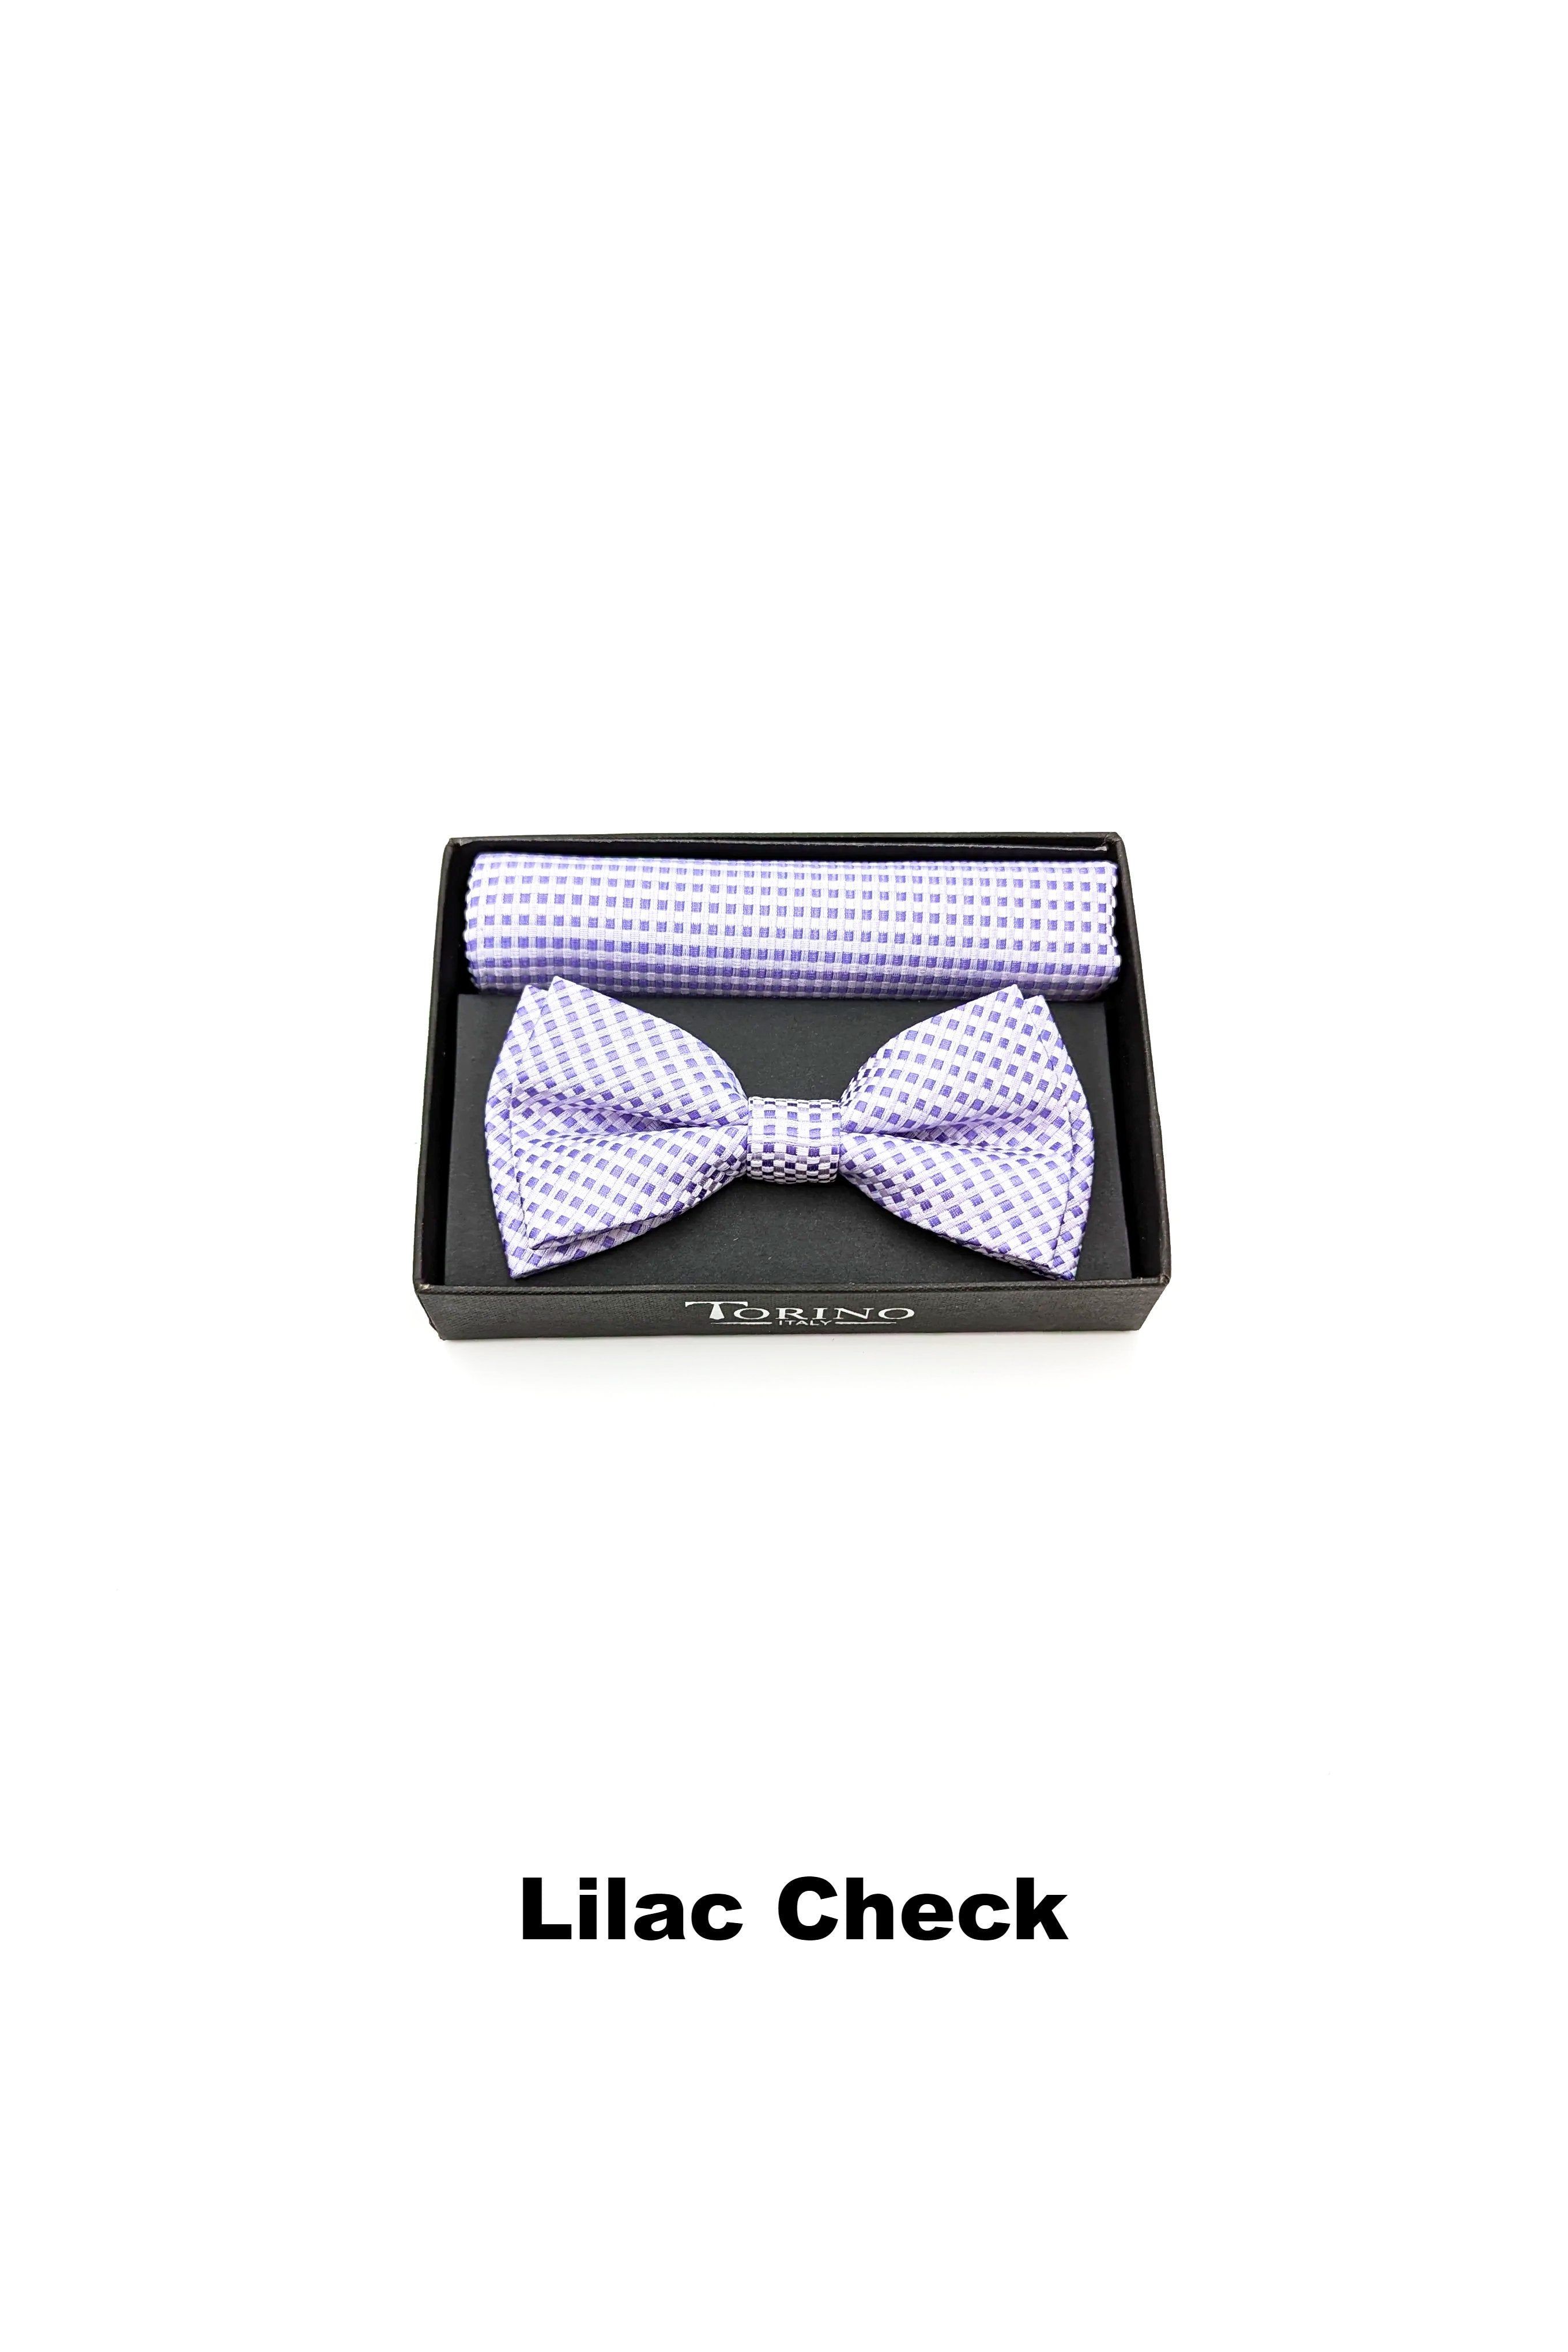 Textured Mens Lilac Check Bow and Pocket Square